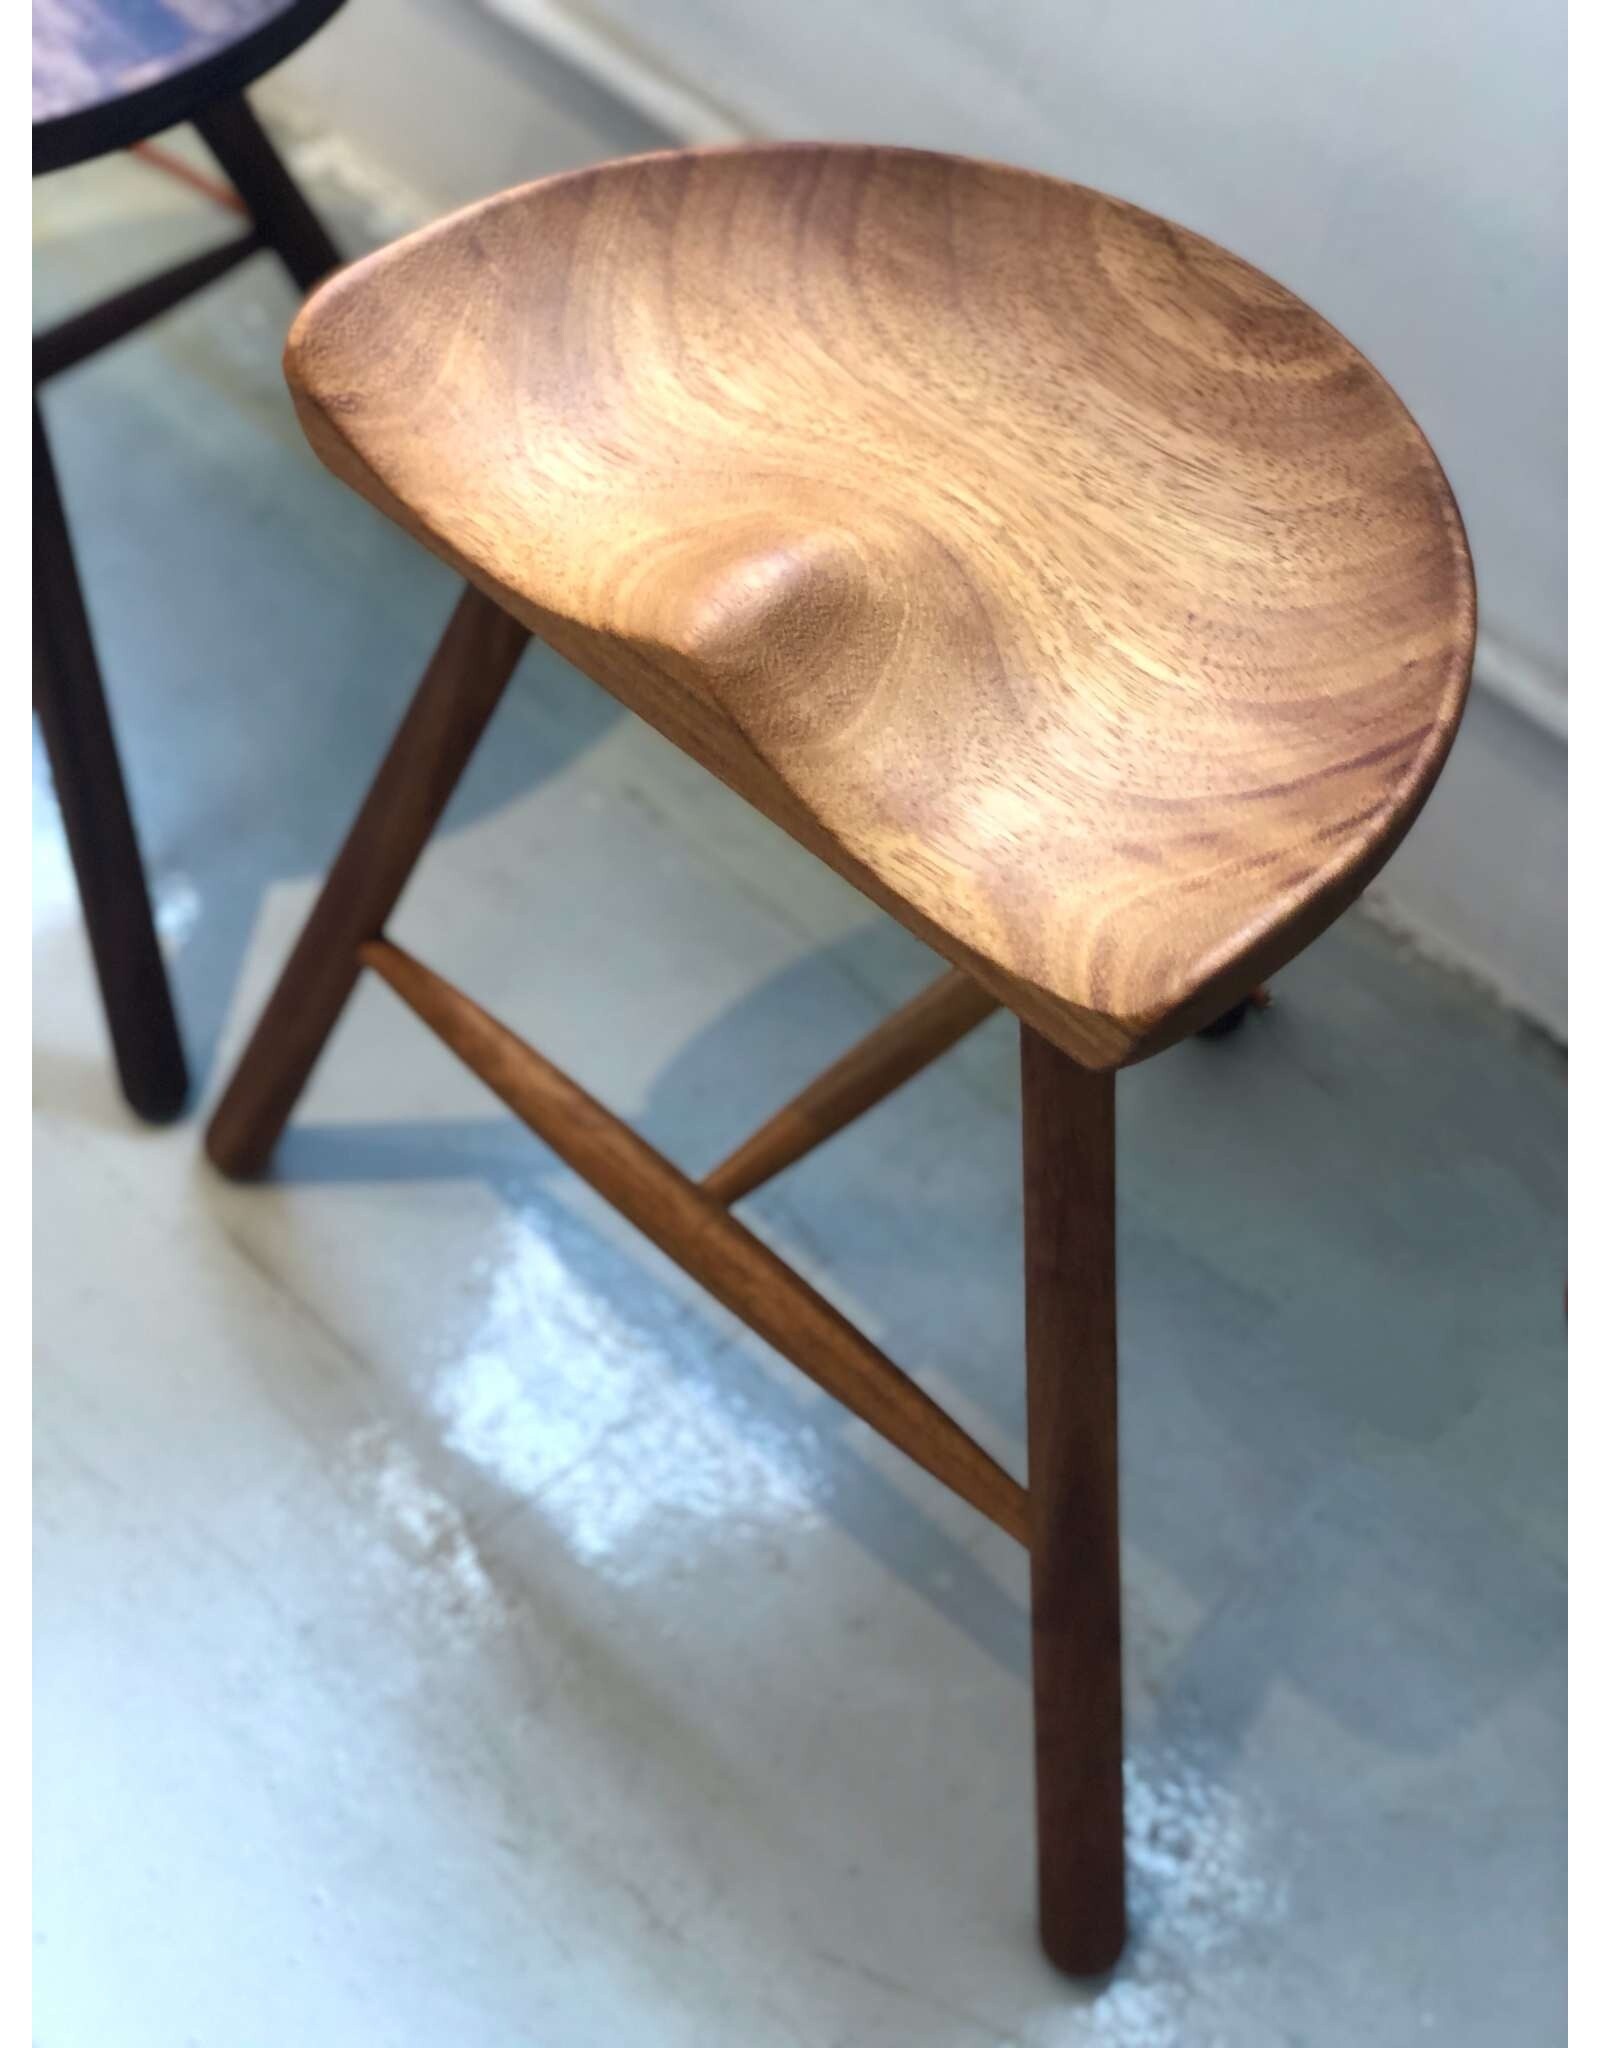 THE SHOEMAKER CHAIR IN 49CM HEIGHT, OILED IROKO